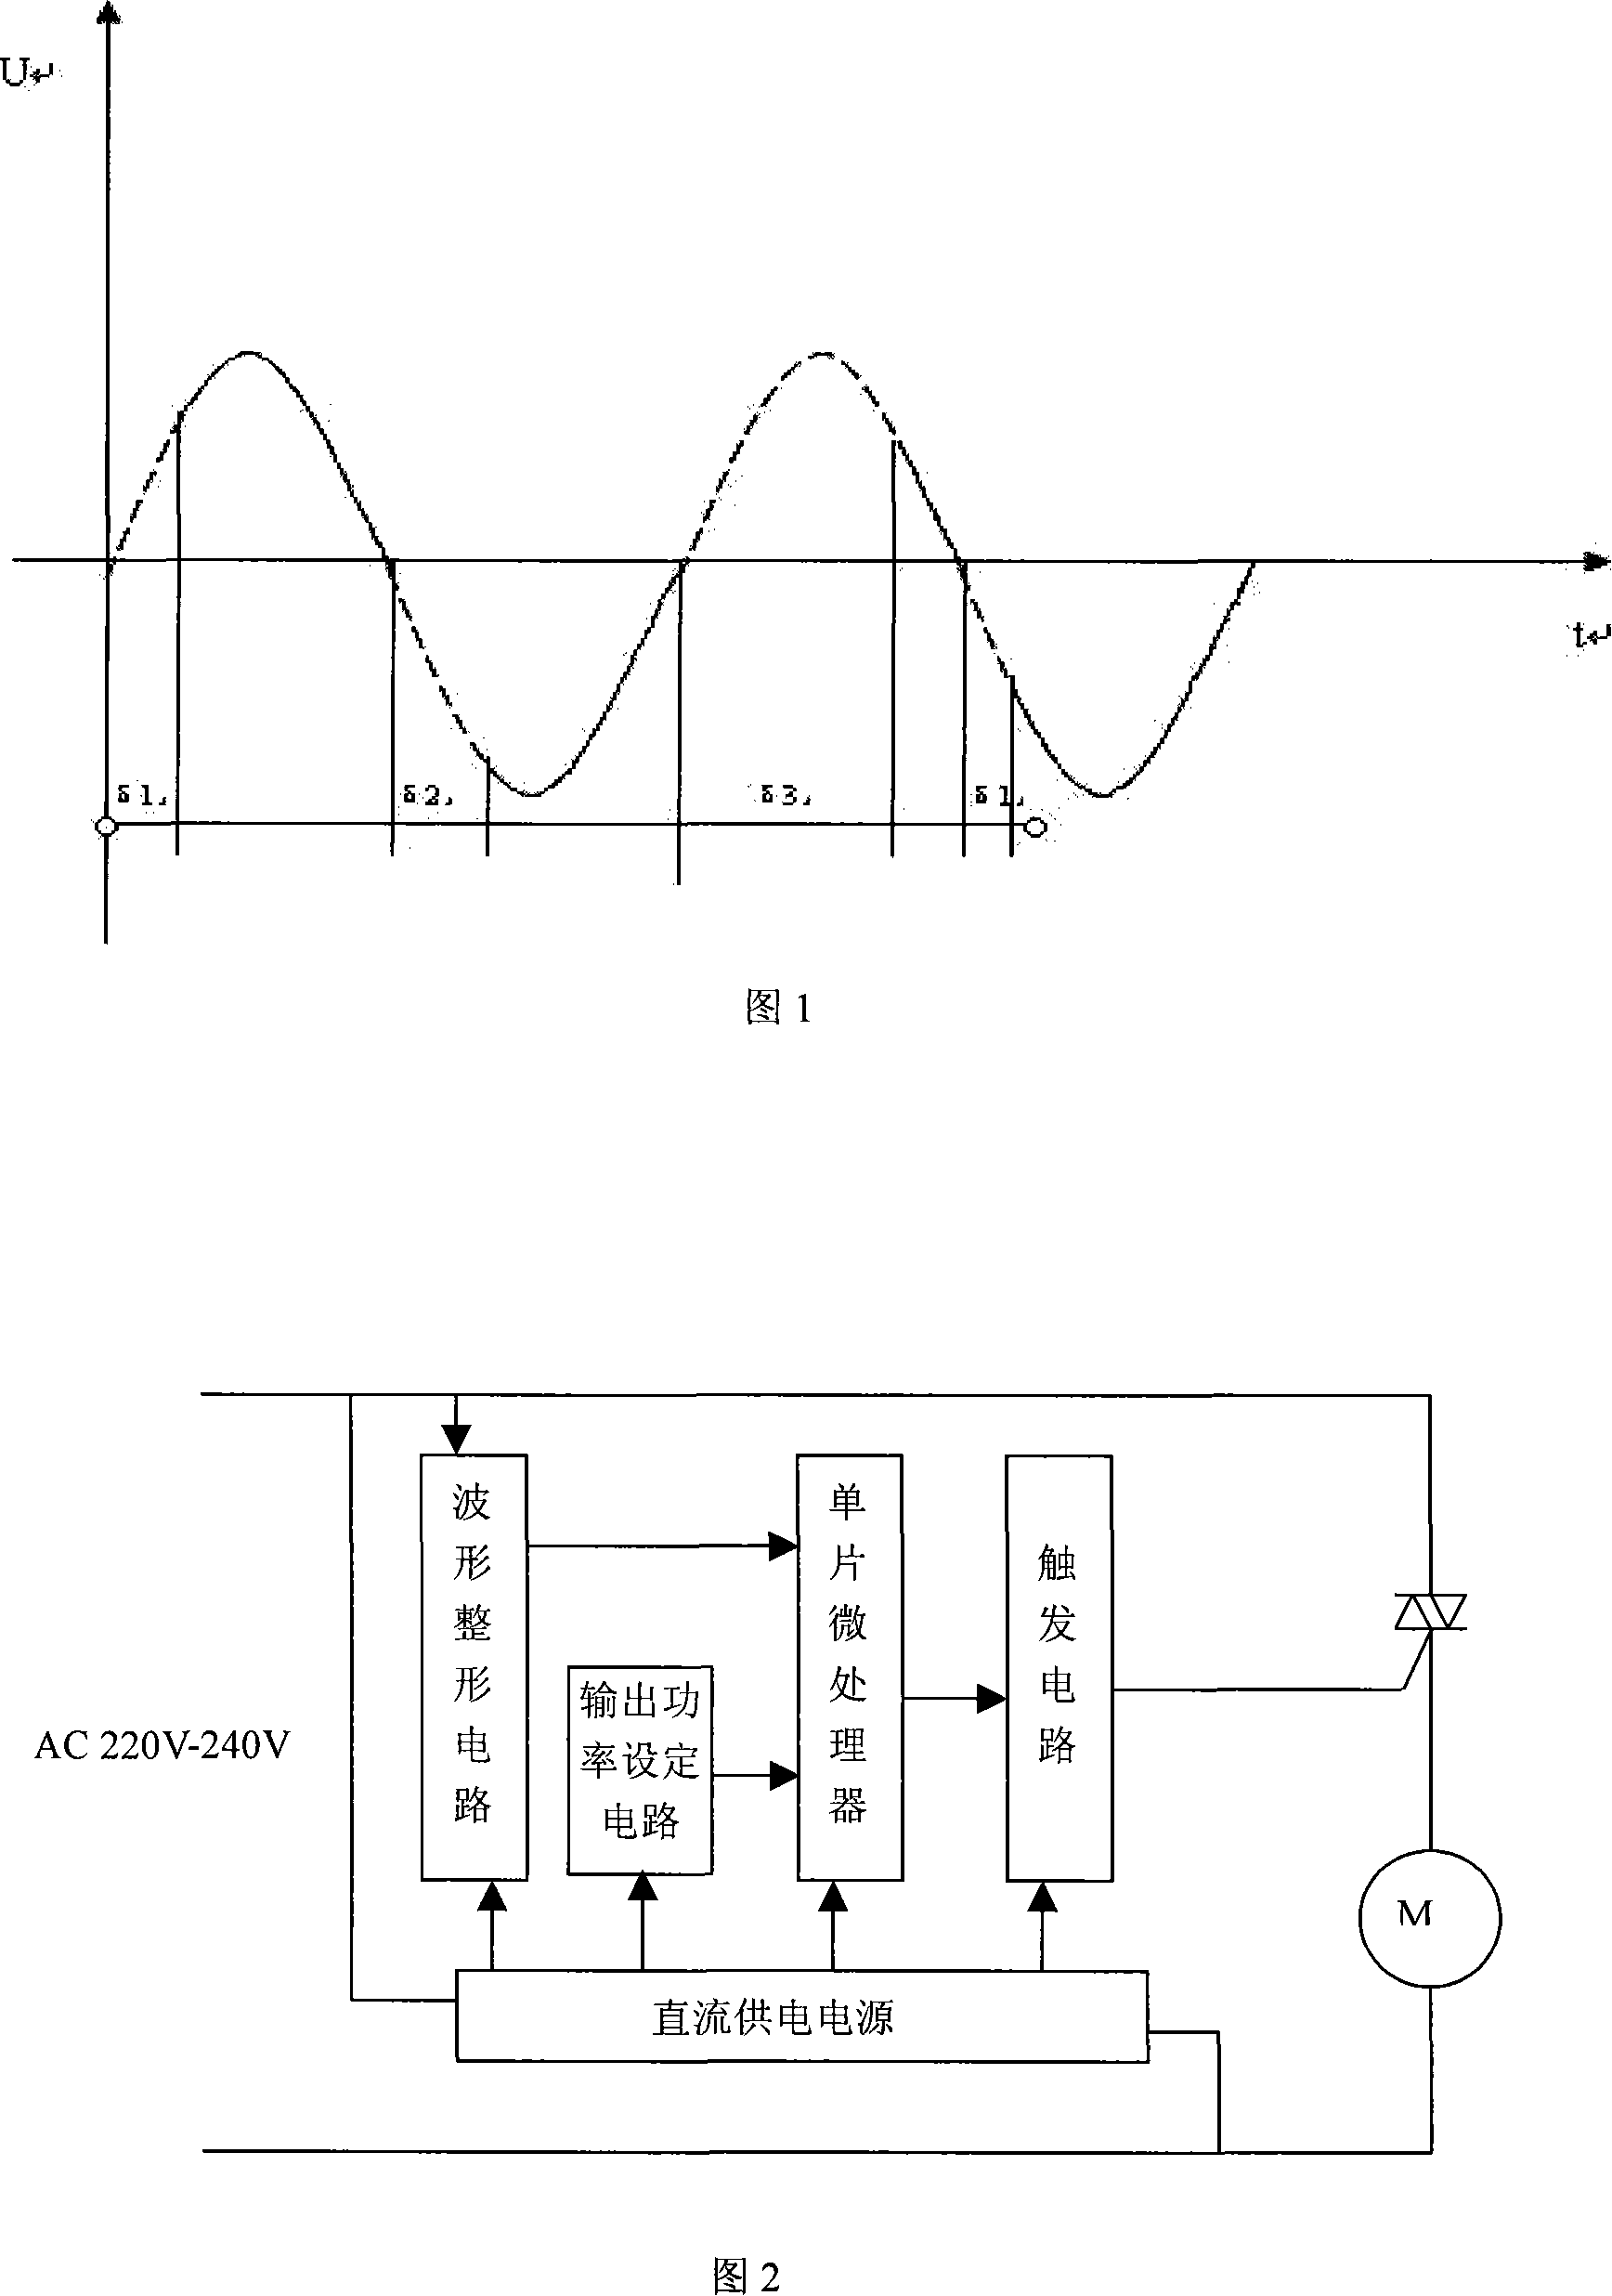 Method for suppressing harmonic current of high-power AC motor